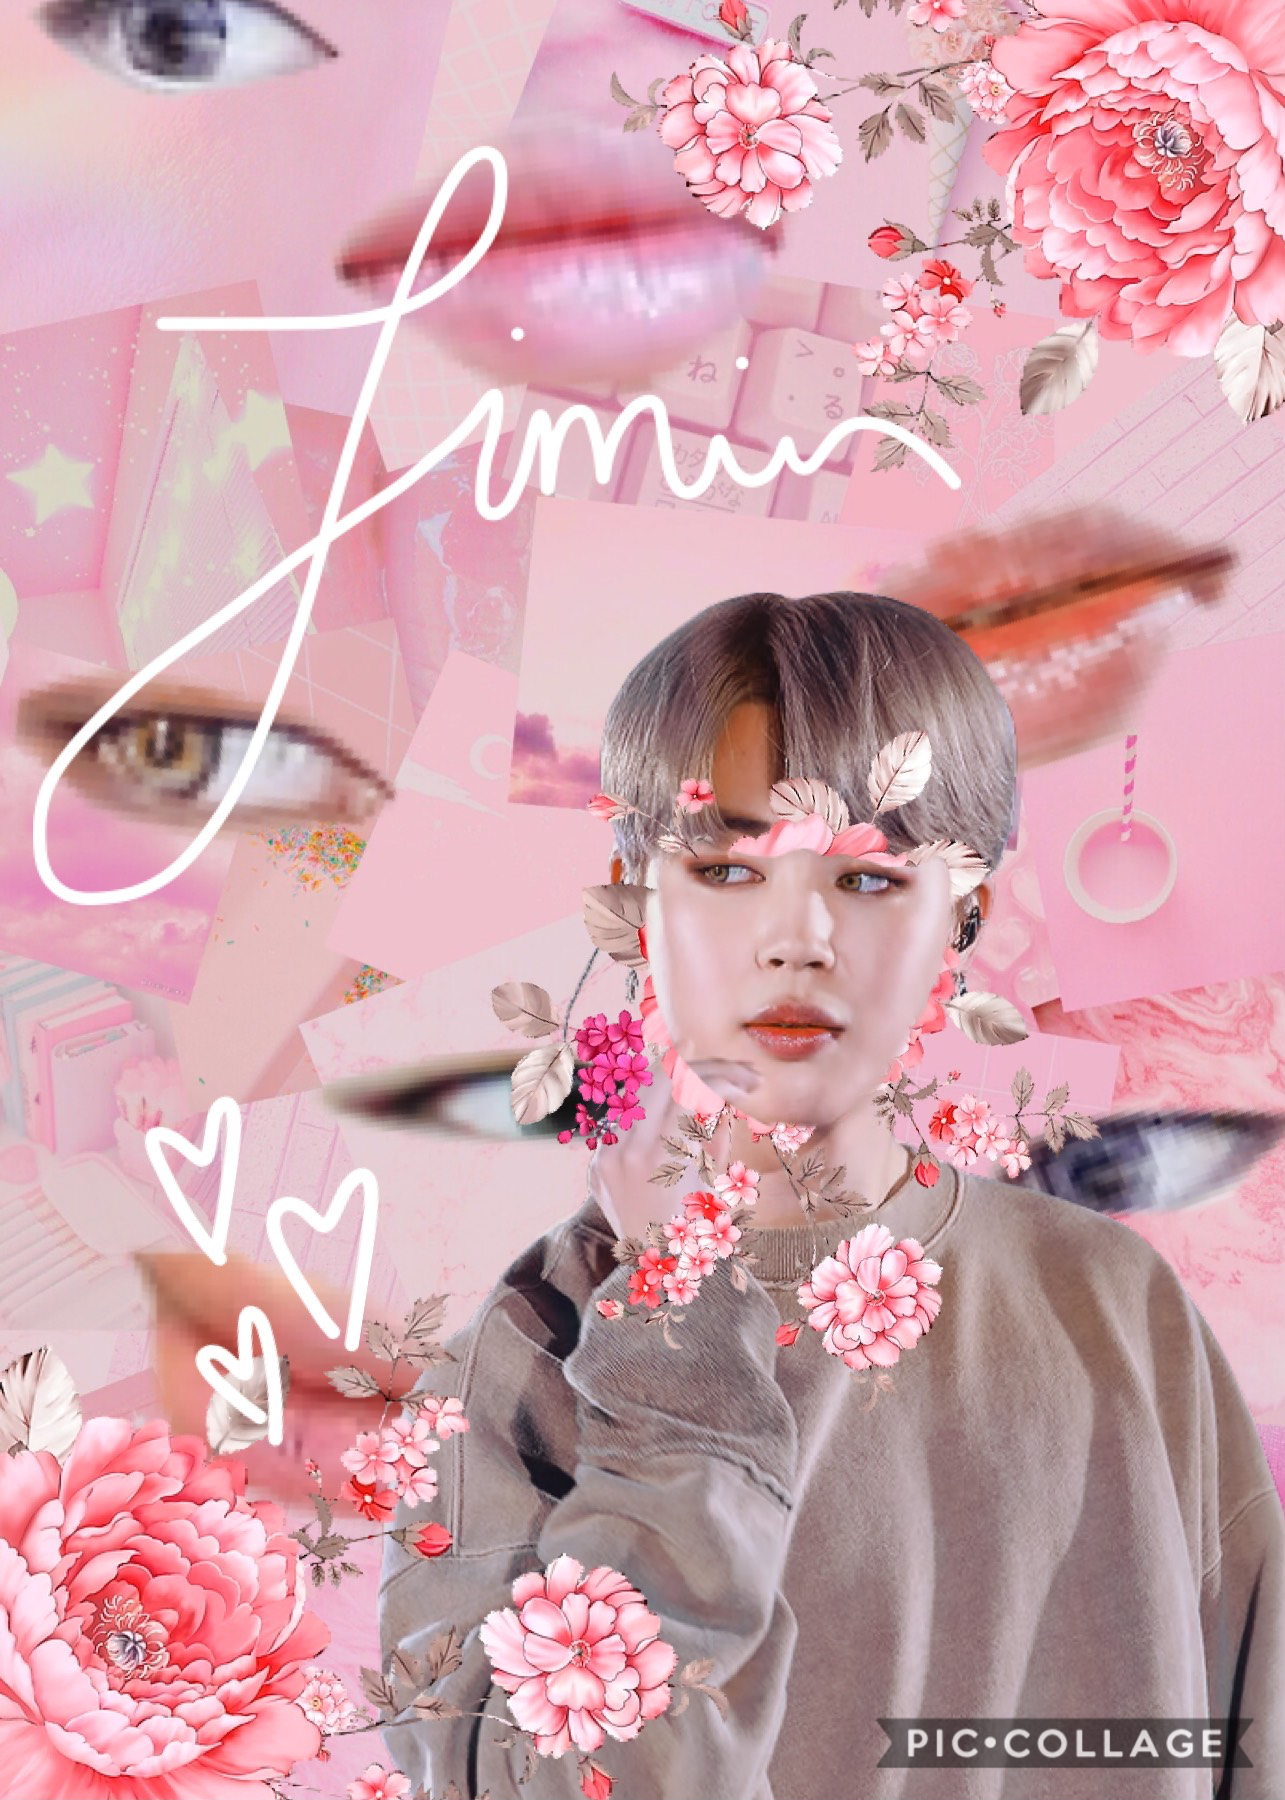 💞tappy💞

here’s ANOTHER Jimin edit (I swear I’m an OT7 Jimin just seems to manage to work his way into most of my edits)

I just rewatched Mean Girls for the 19283829291637th time - I love that movie 👌

qotd: favourite movie of all time?
aotd: The Lion Ki